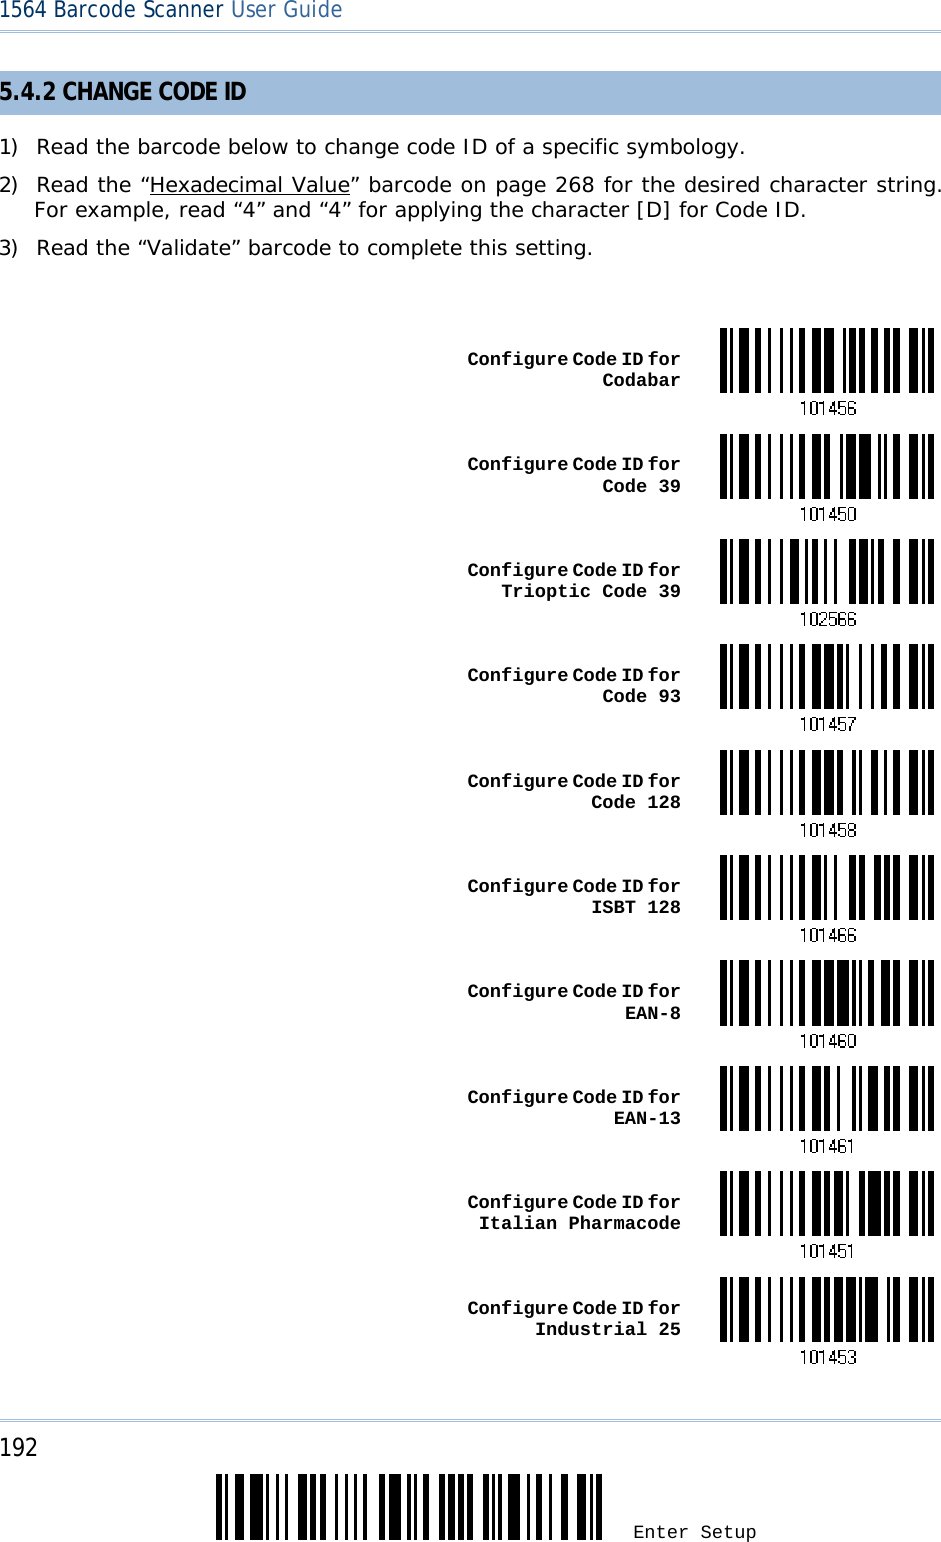 192 Enter Setup 1564 Barcode Scanner User Guide  5.4.2 CHANGE CODE ID 1) Read the barcode below to change code ID of a specific symbology. 2) Read the “Hexadecimal Value” barcode on page 268 for the desired character string. For example, read “4” and “4” for applying the character [D] for Code ID. 3) Read the “Validate” barcode to complete this setting.   Configure Code ID for Codabar Configure Code ID for Code 39 Configure Code ID for Trioptic Code 39 Configure Code ID for Code 93 Configure Code ID for Code 128 Configure Code ID for ISBT 128 Configure Code ID for EAN-8 Configure Code ID for EAN-13 Configure Code ID for Italian Pharmacode Configure Code ID for Industrial 25 